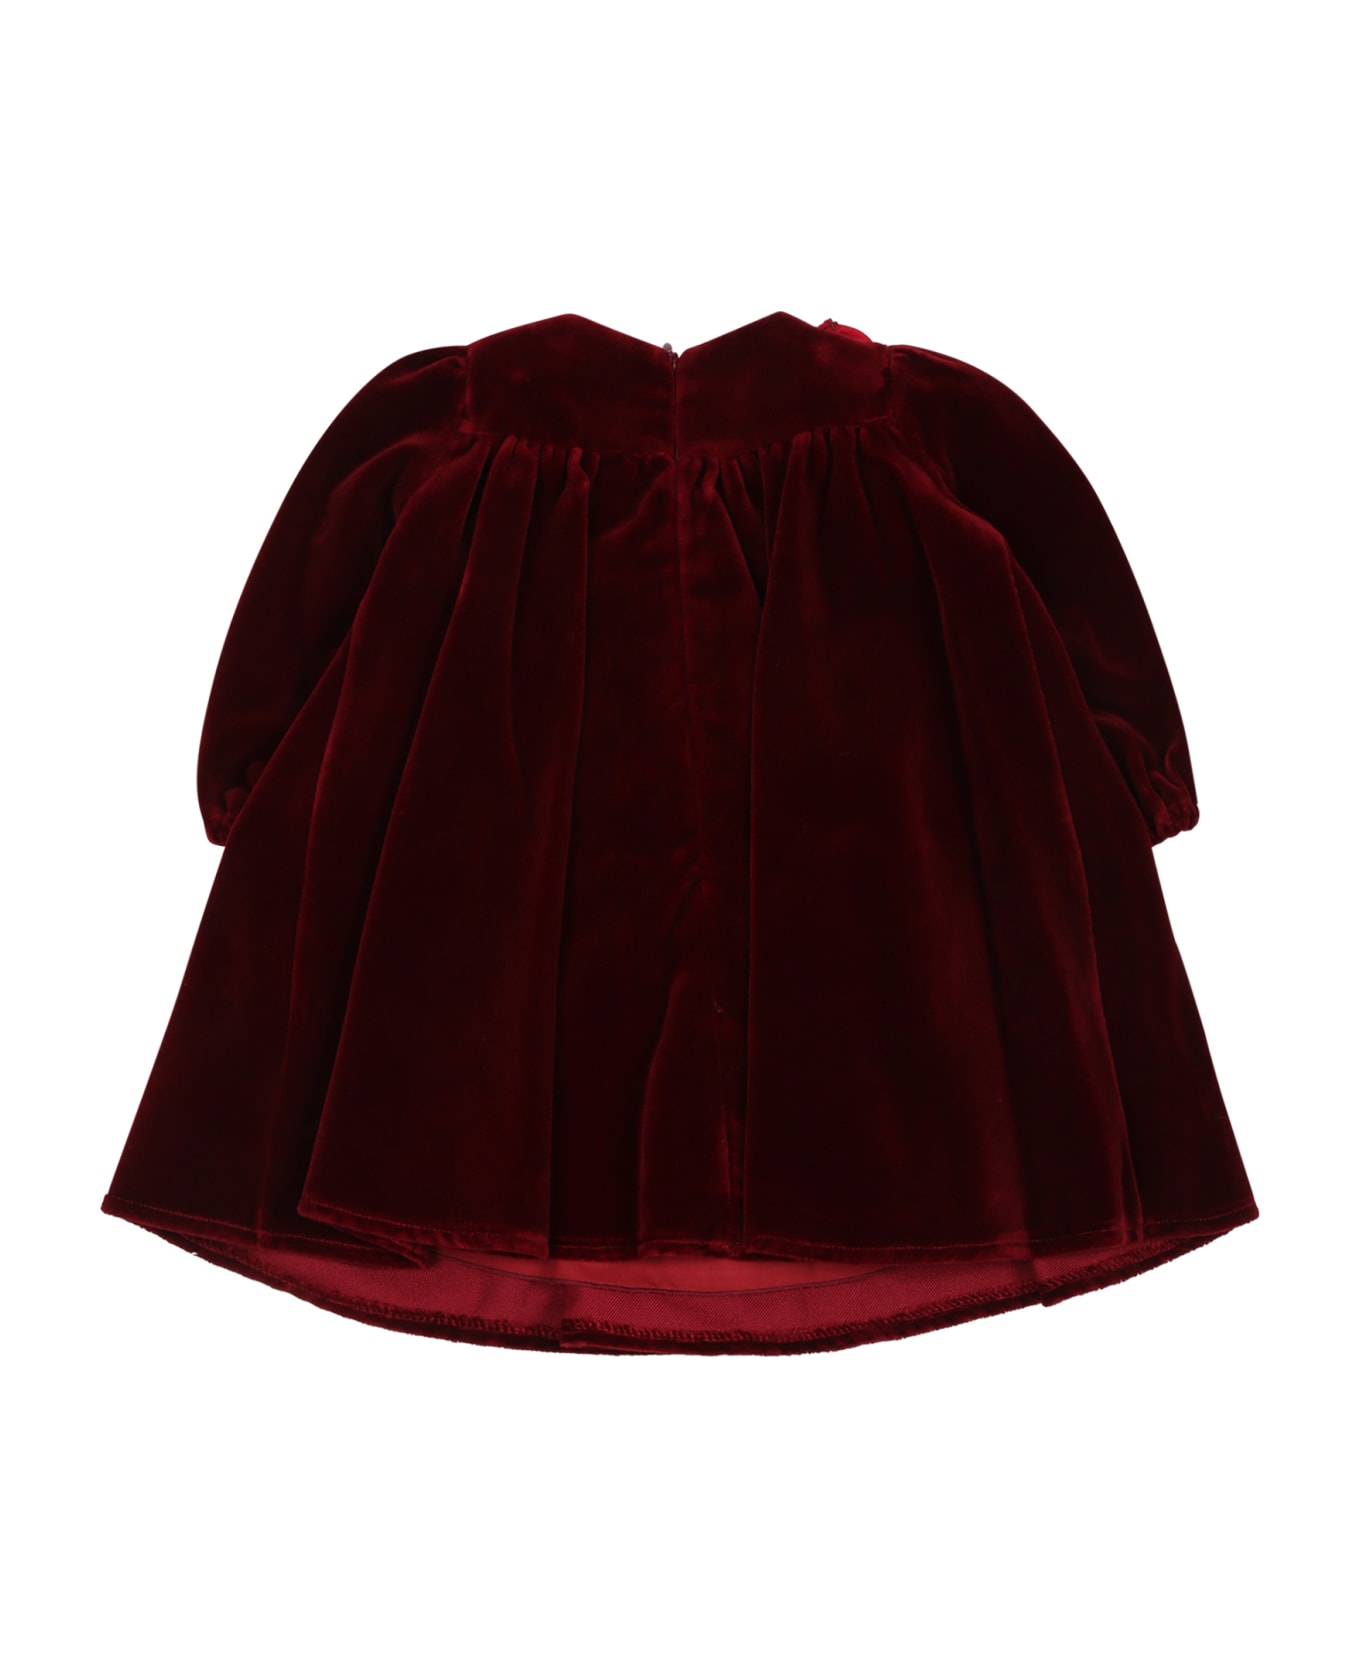 La stupenderia Burgundy Dress For Baby Girl With Bow - Bordeaux